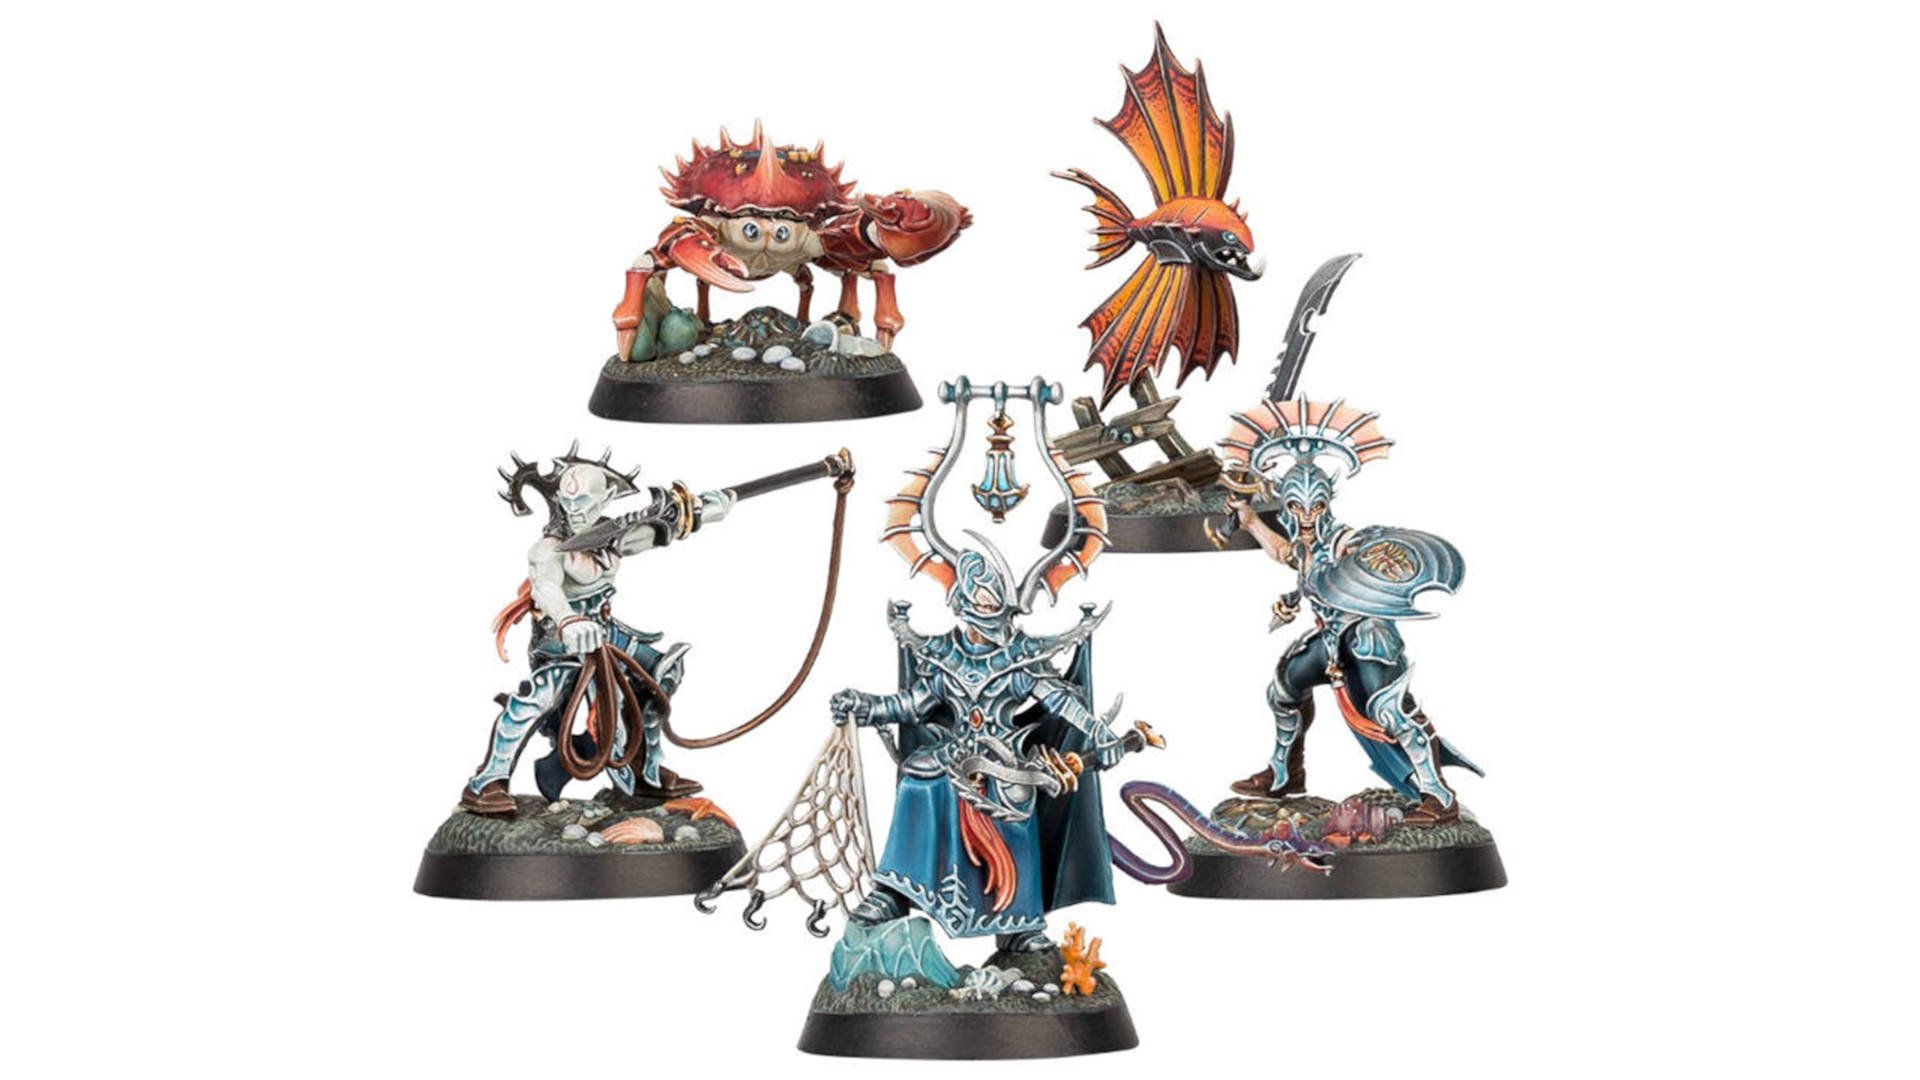 Warhammer Underworlds' latest warband features a giant crab and